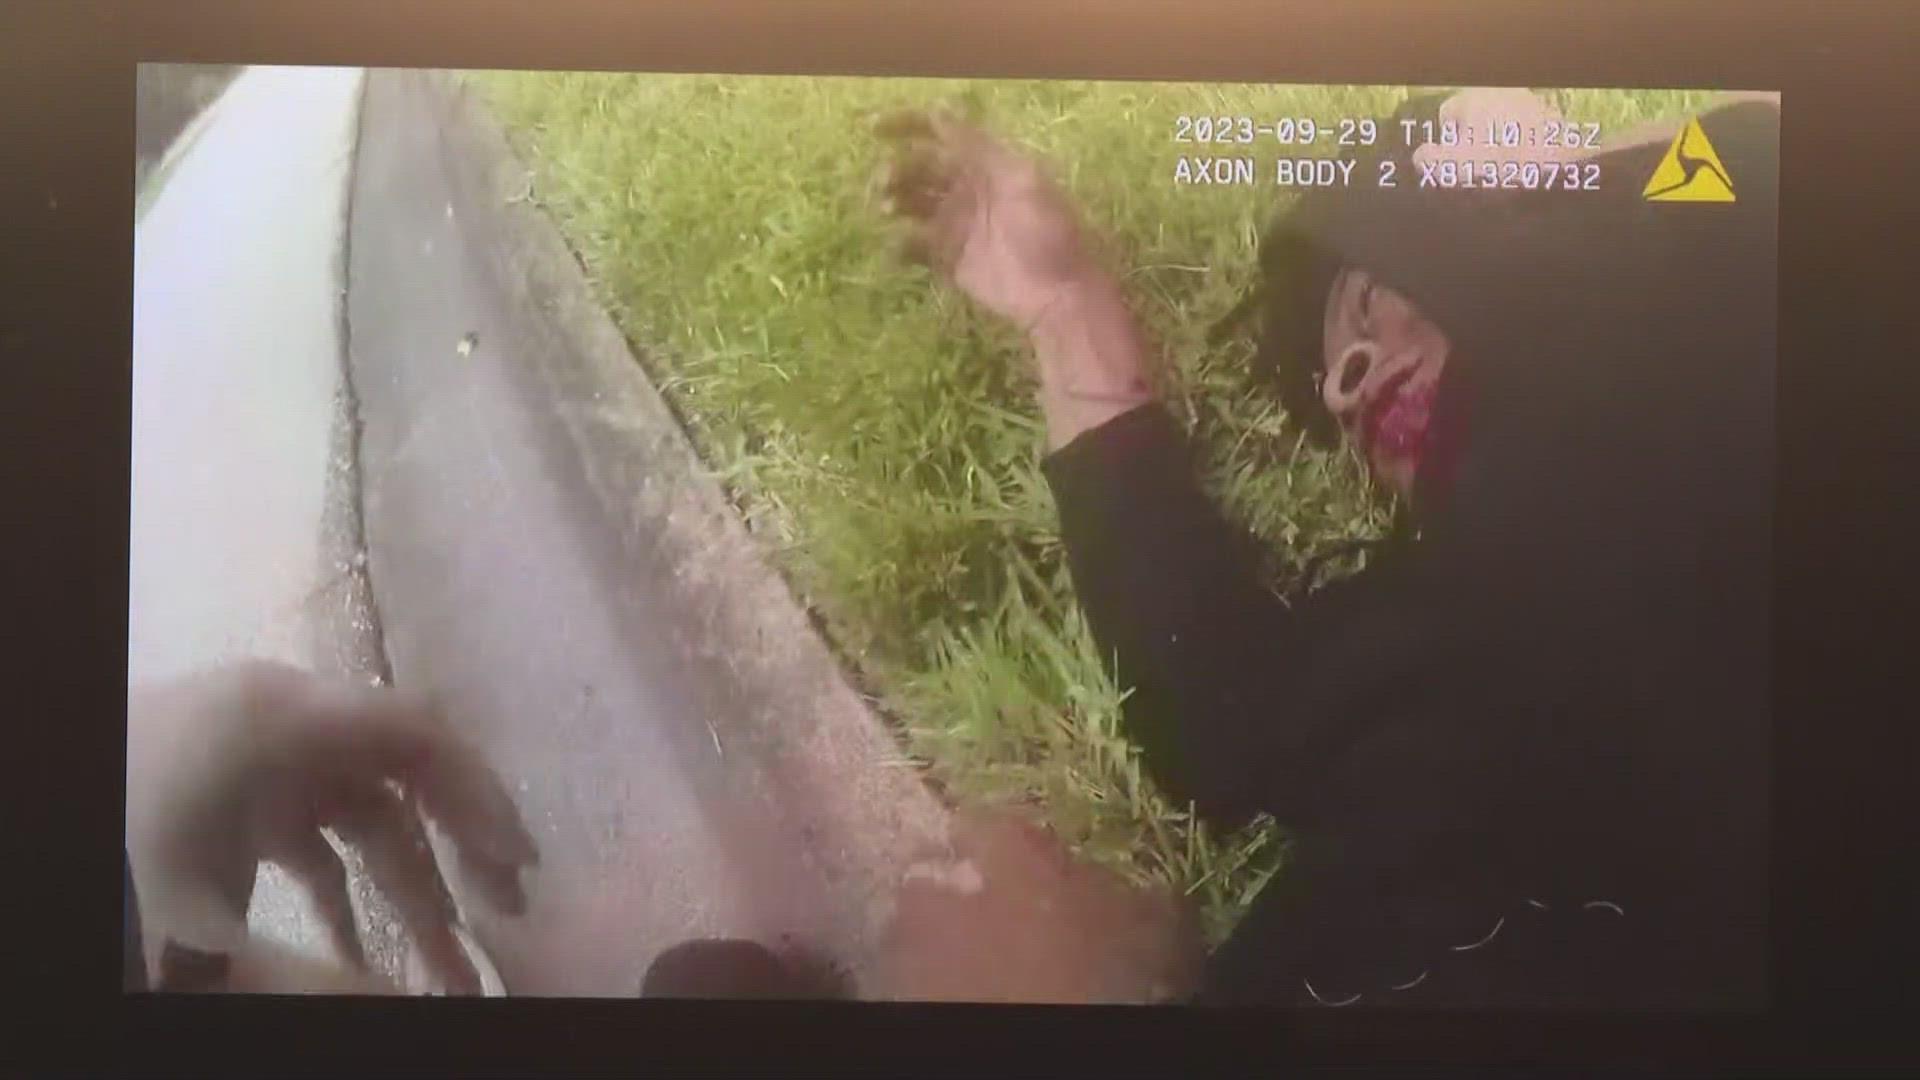 A video of Woods being beaten by police went viral Friday. The sheriff claims footage of him being kicked was 'altered,' but records show he was struck 17 times.